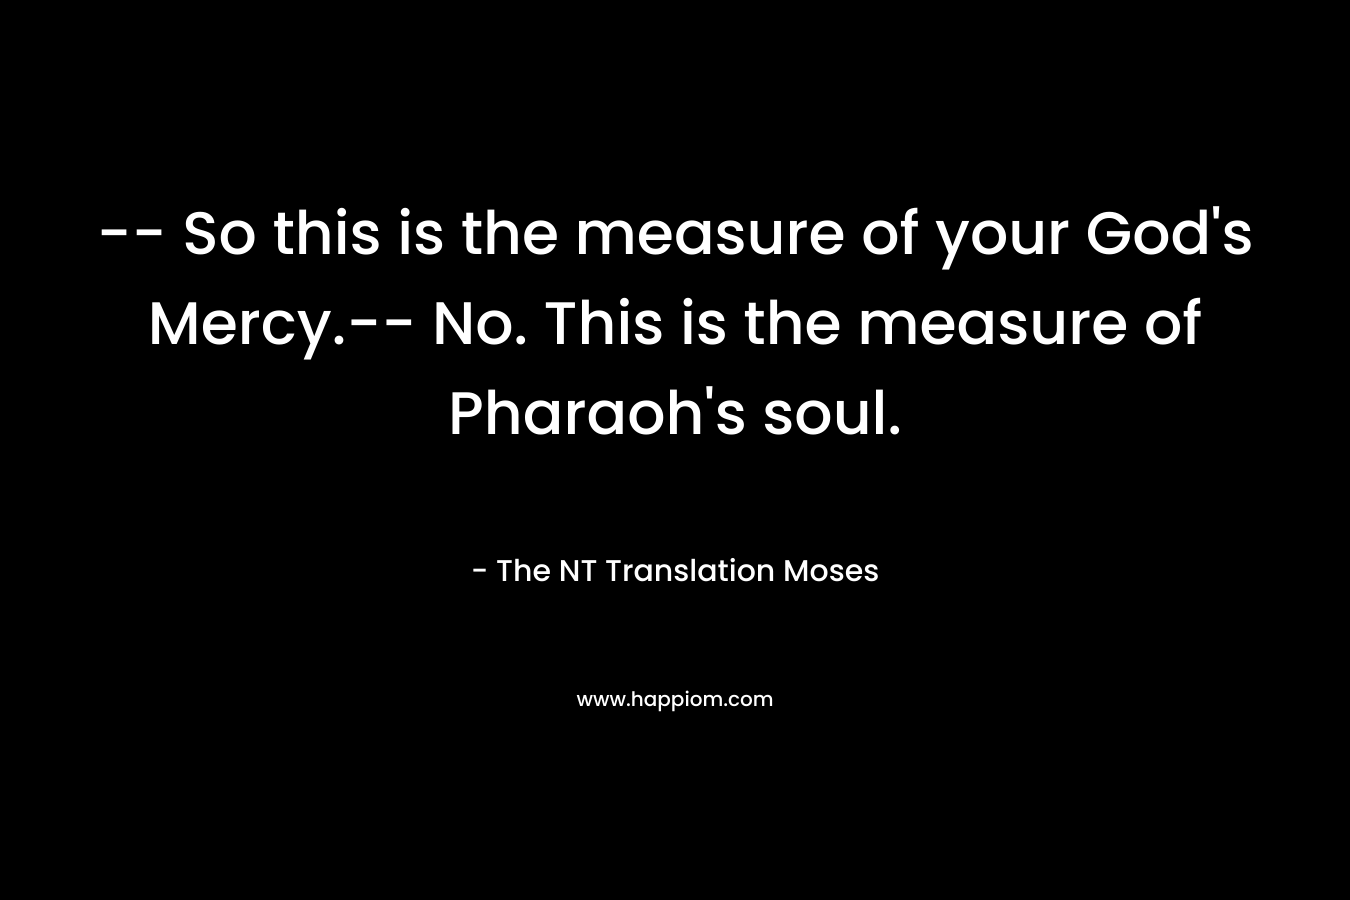 -- So this is the measure of your God's Mercy.-- No. This is the measure of Pharaoh's soul.